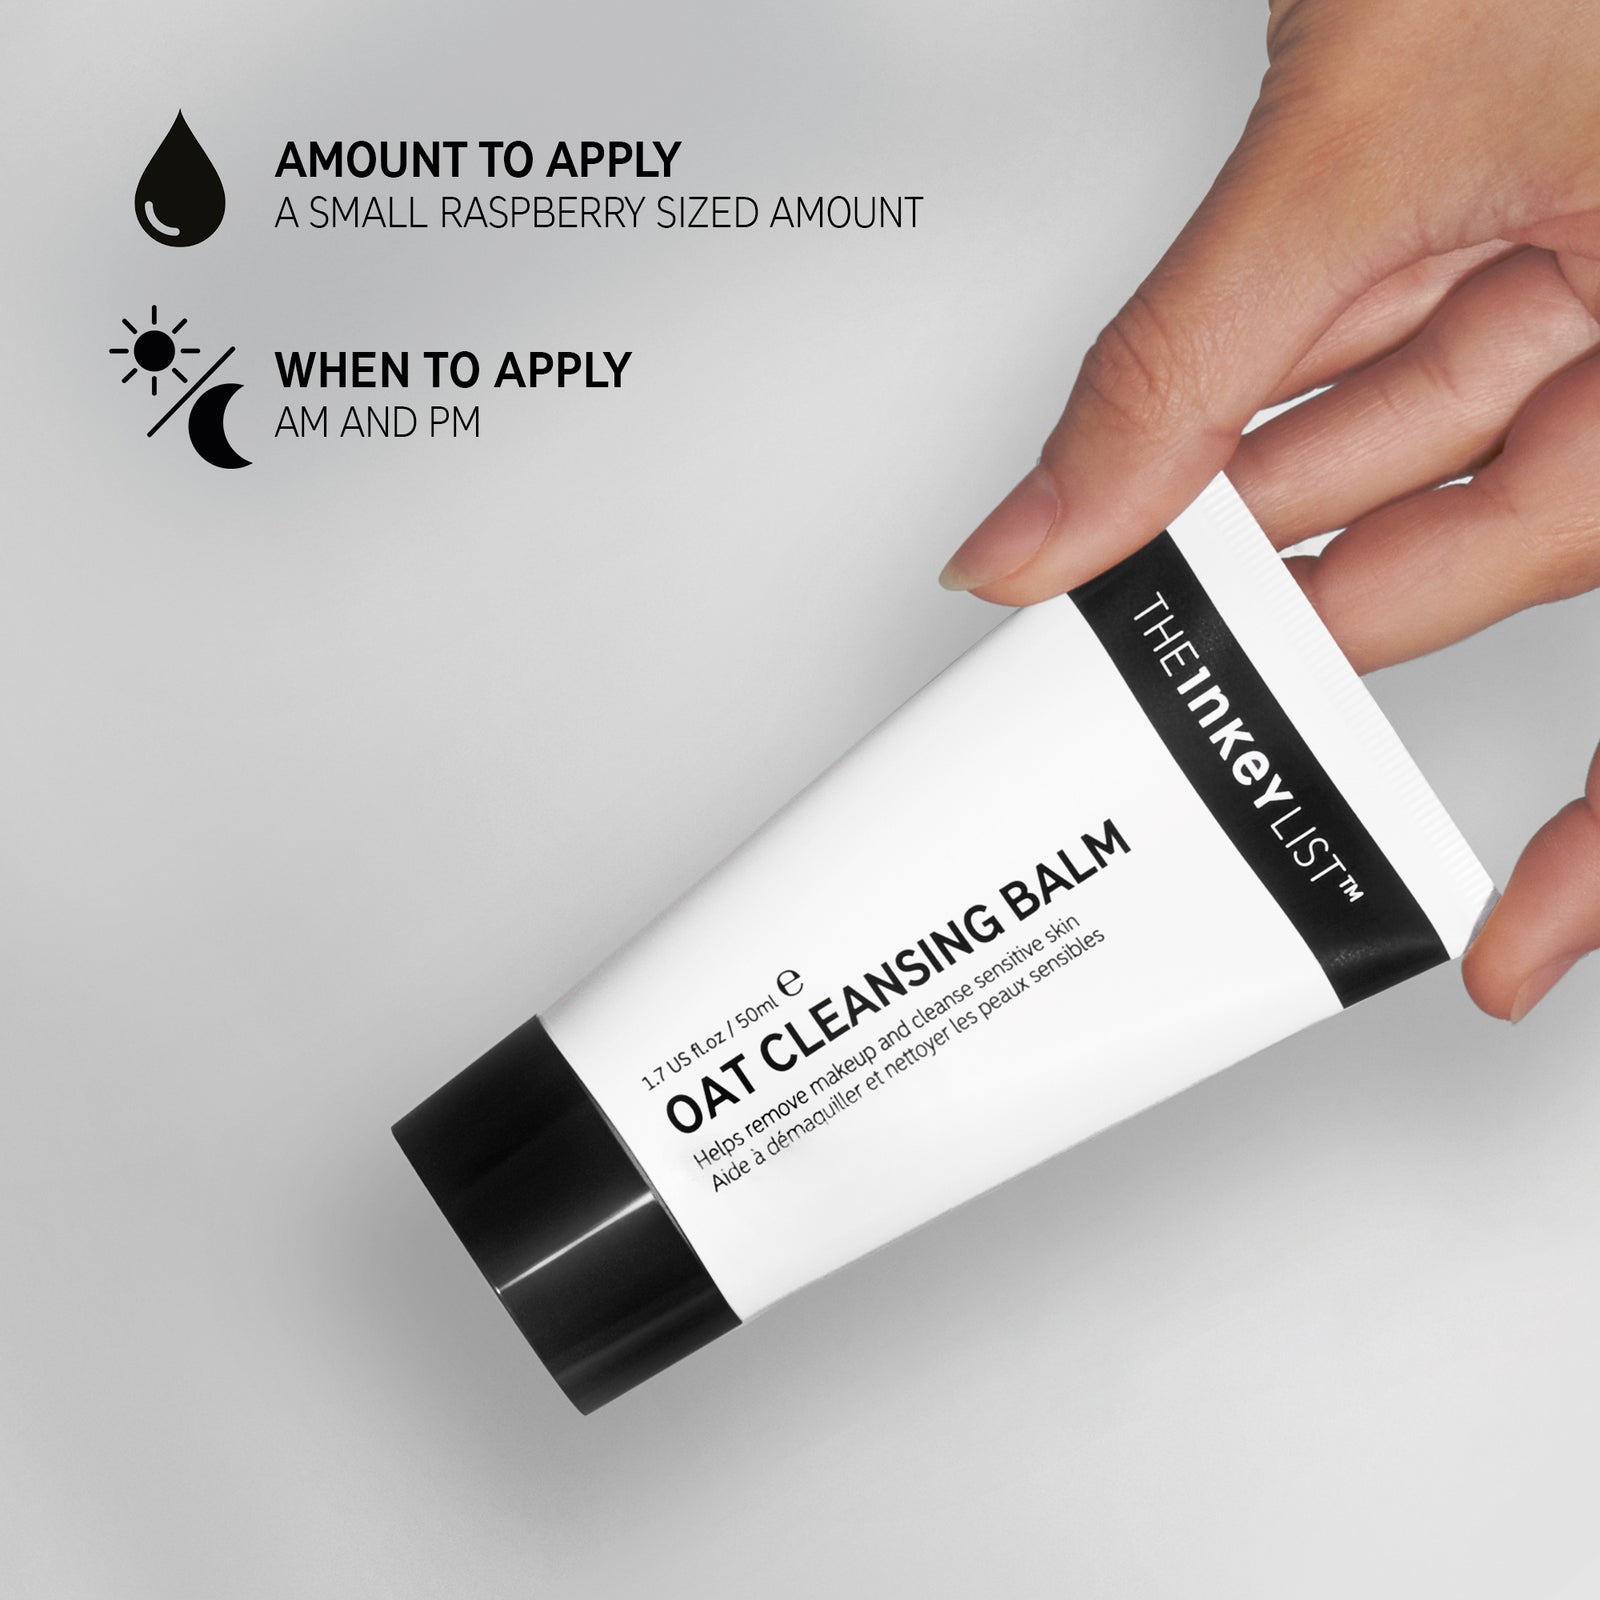 Omega Water Cream Amount to apply: Small Pea Sized Amount, When to apply: AM & PM